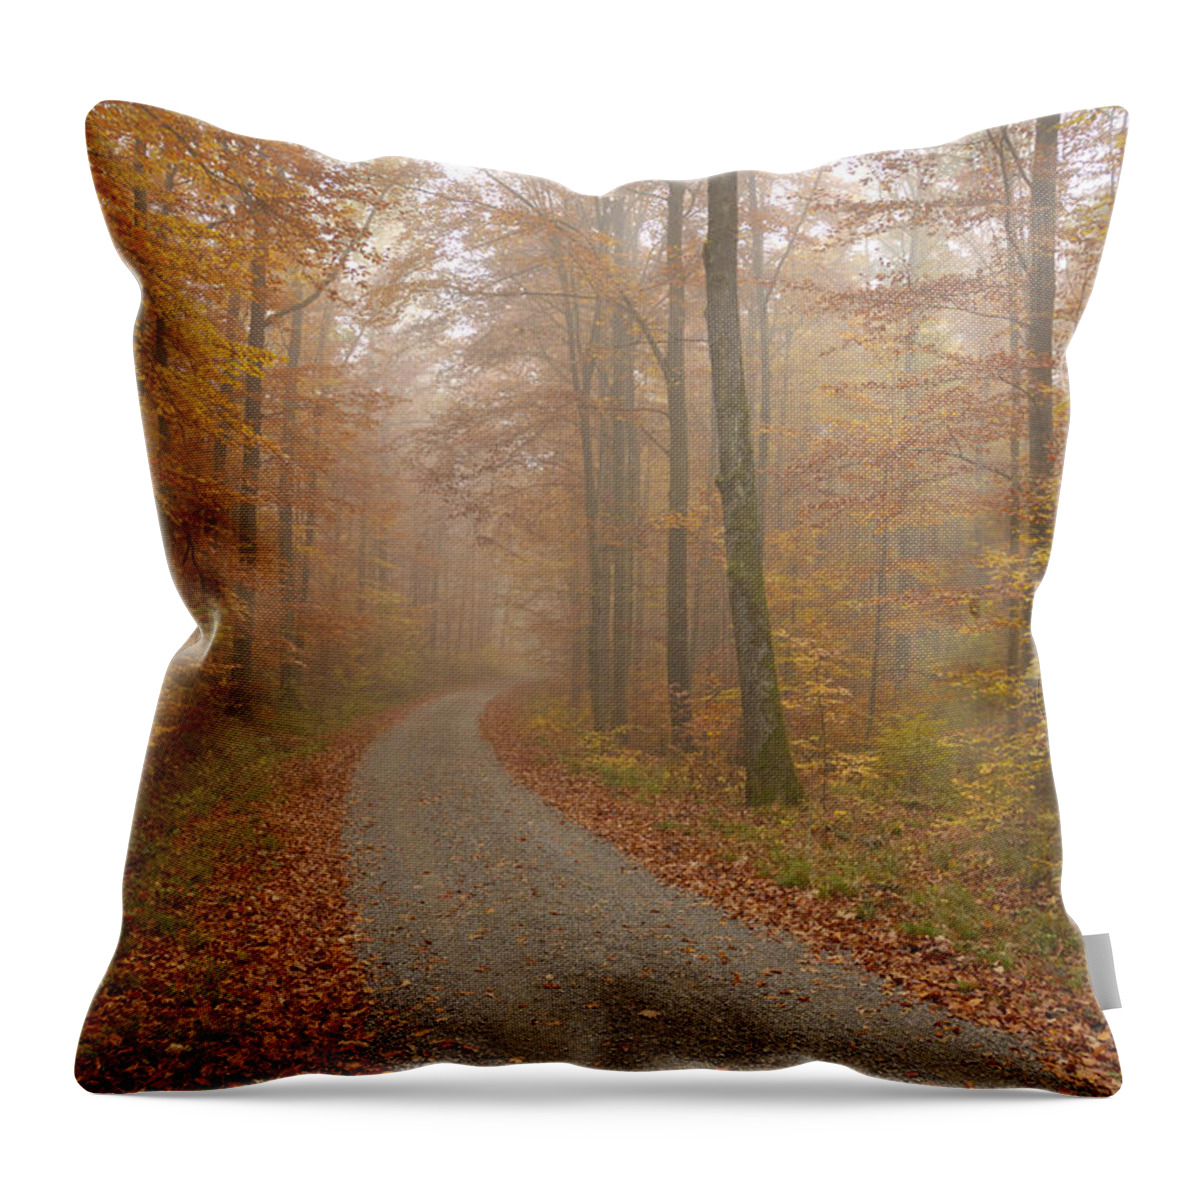 Fall Throw Pillow featuring the photograph Hazy forest in autumn by Matthias Hauser